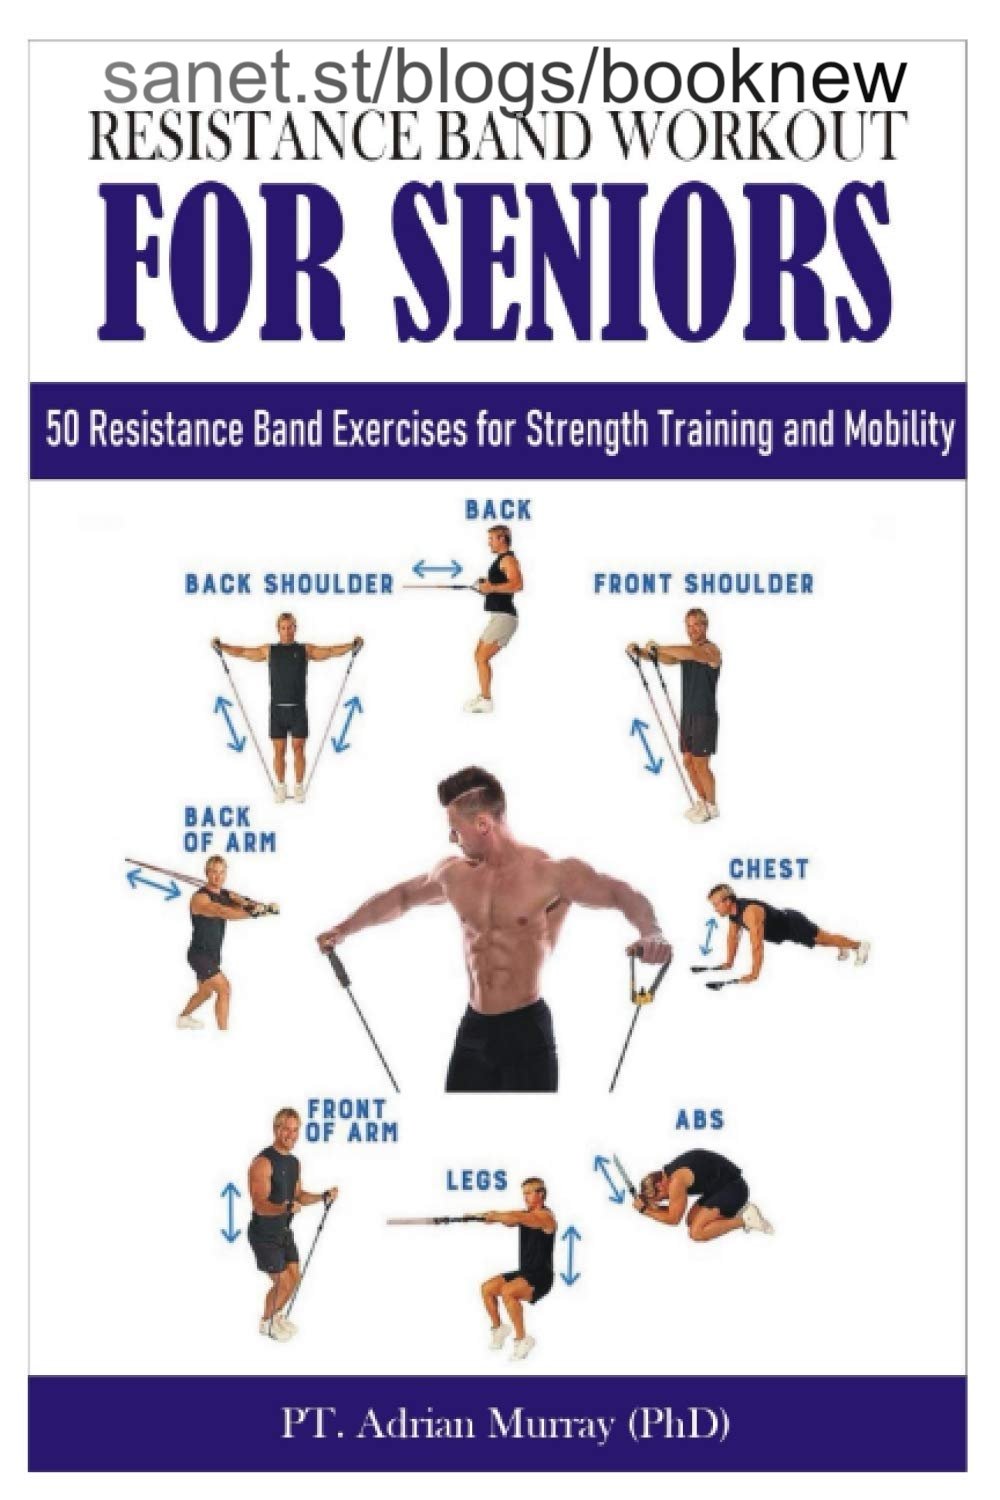 resistance-band-workout-for-seniors-50-resistance-band-exercises-for